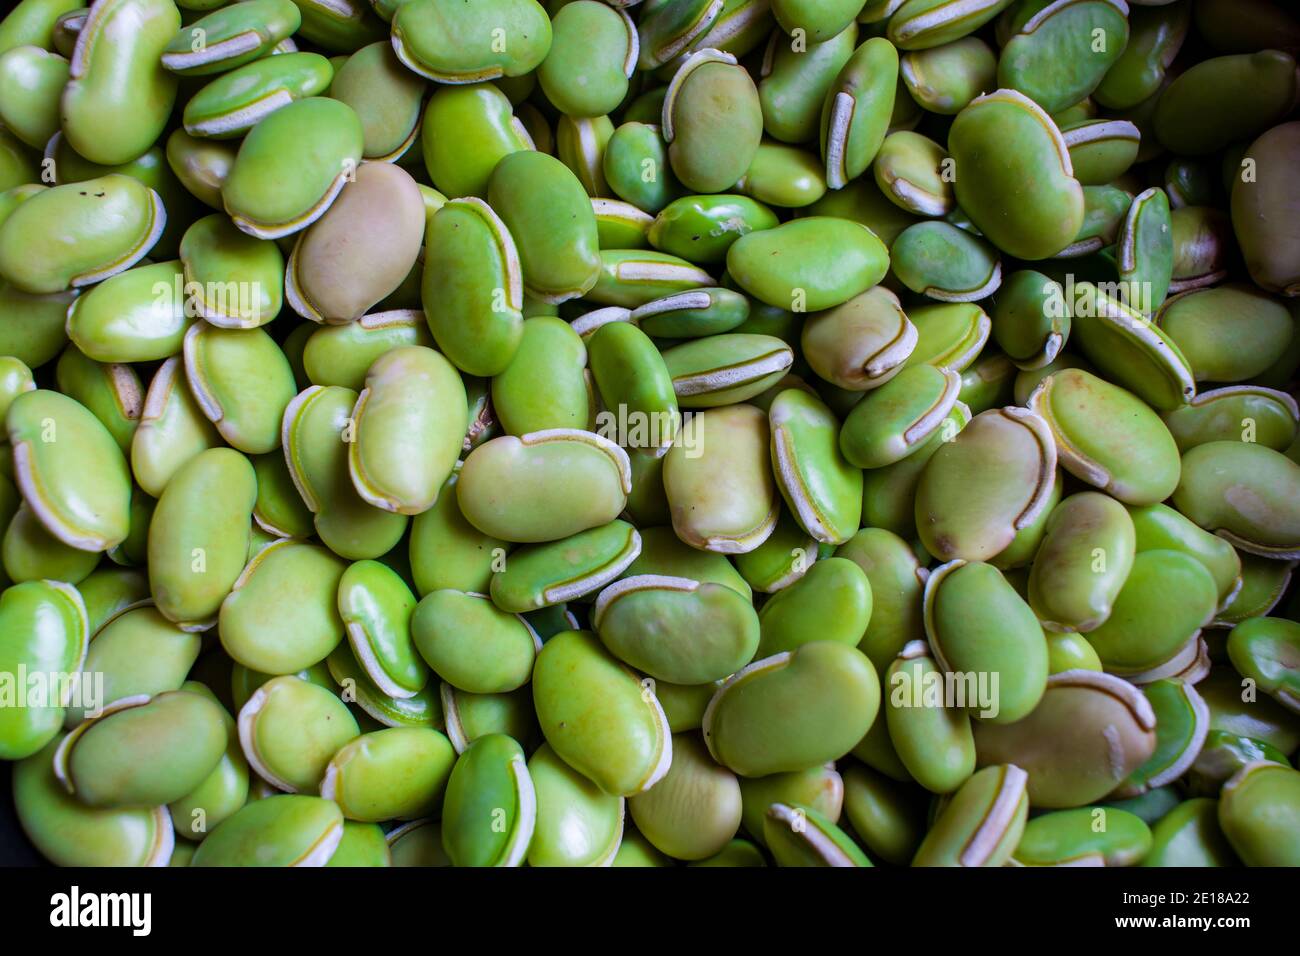 View of green lima beans (also known as mocha kottai in tamil ...